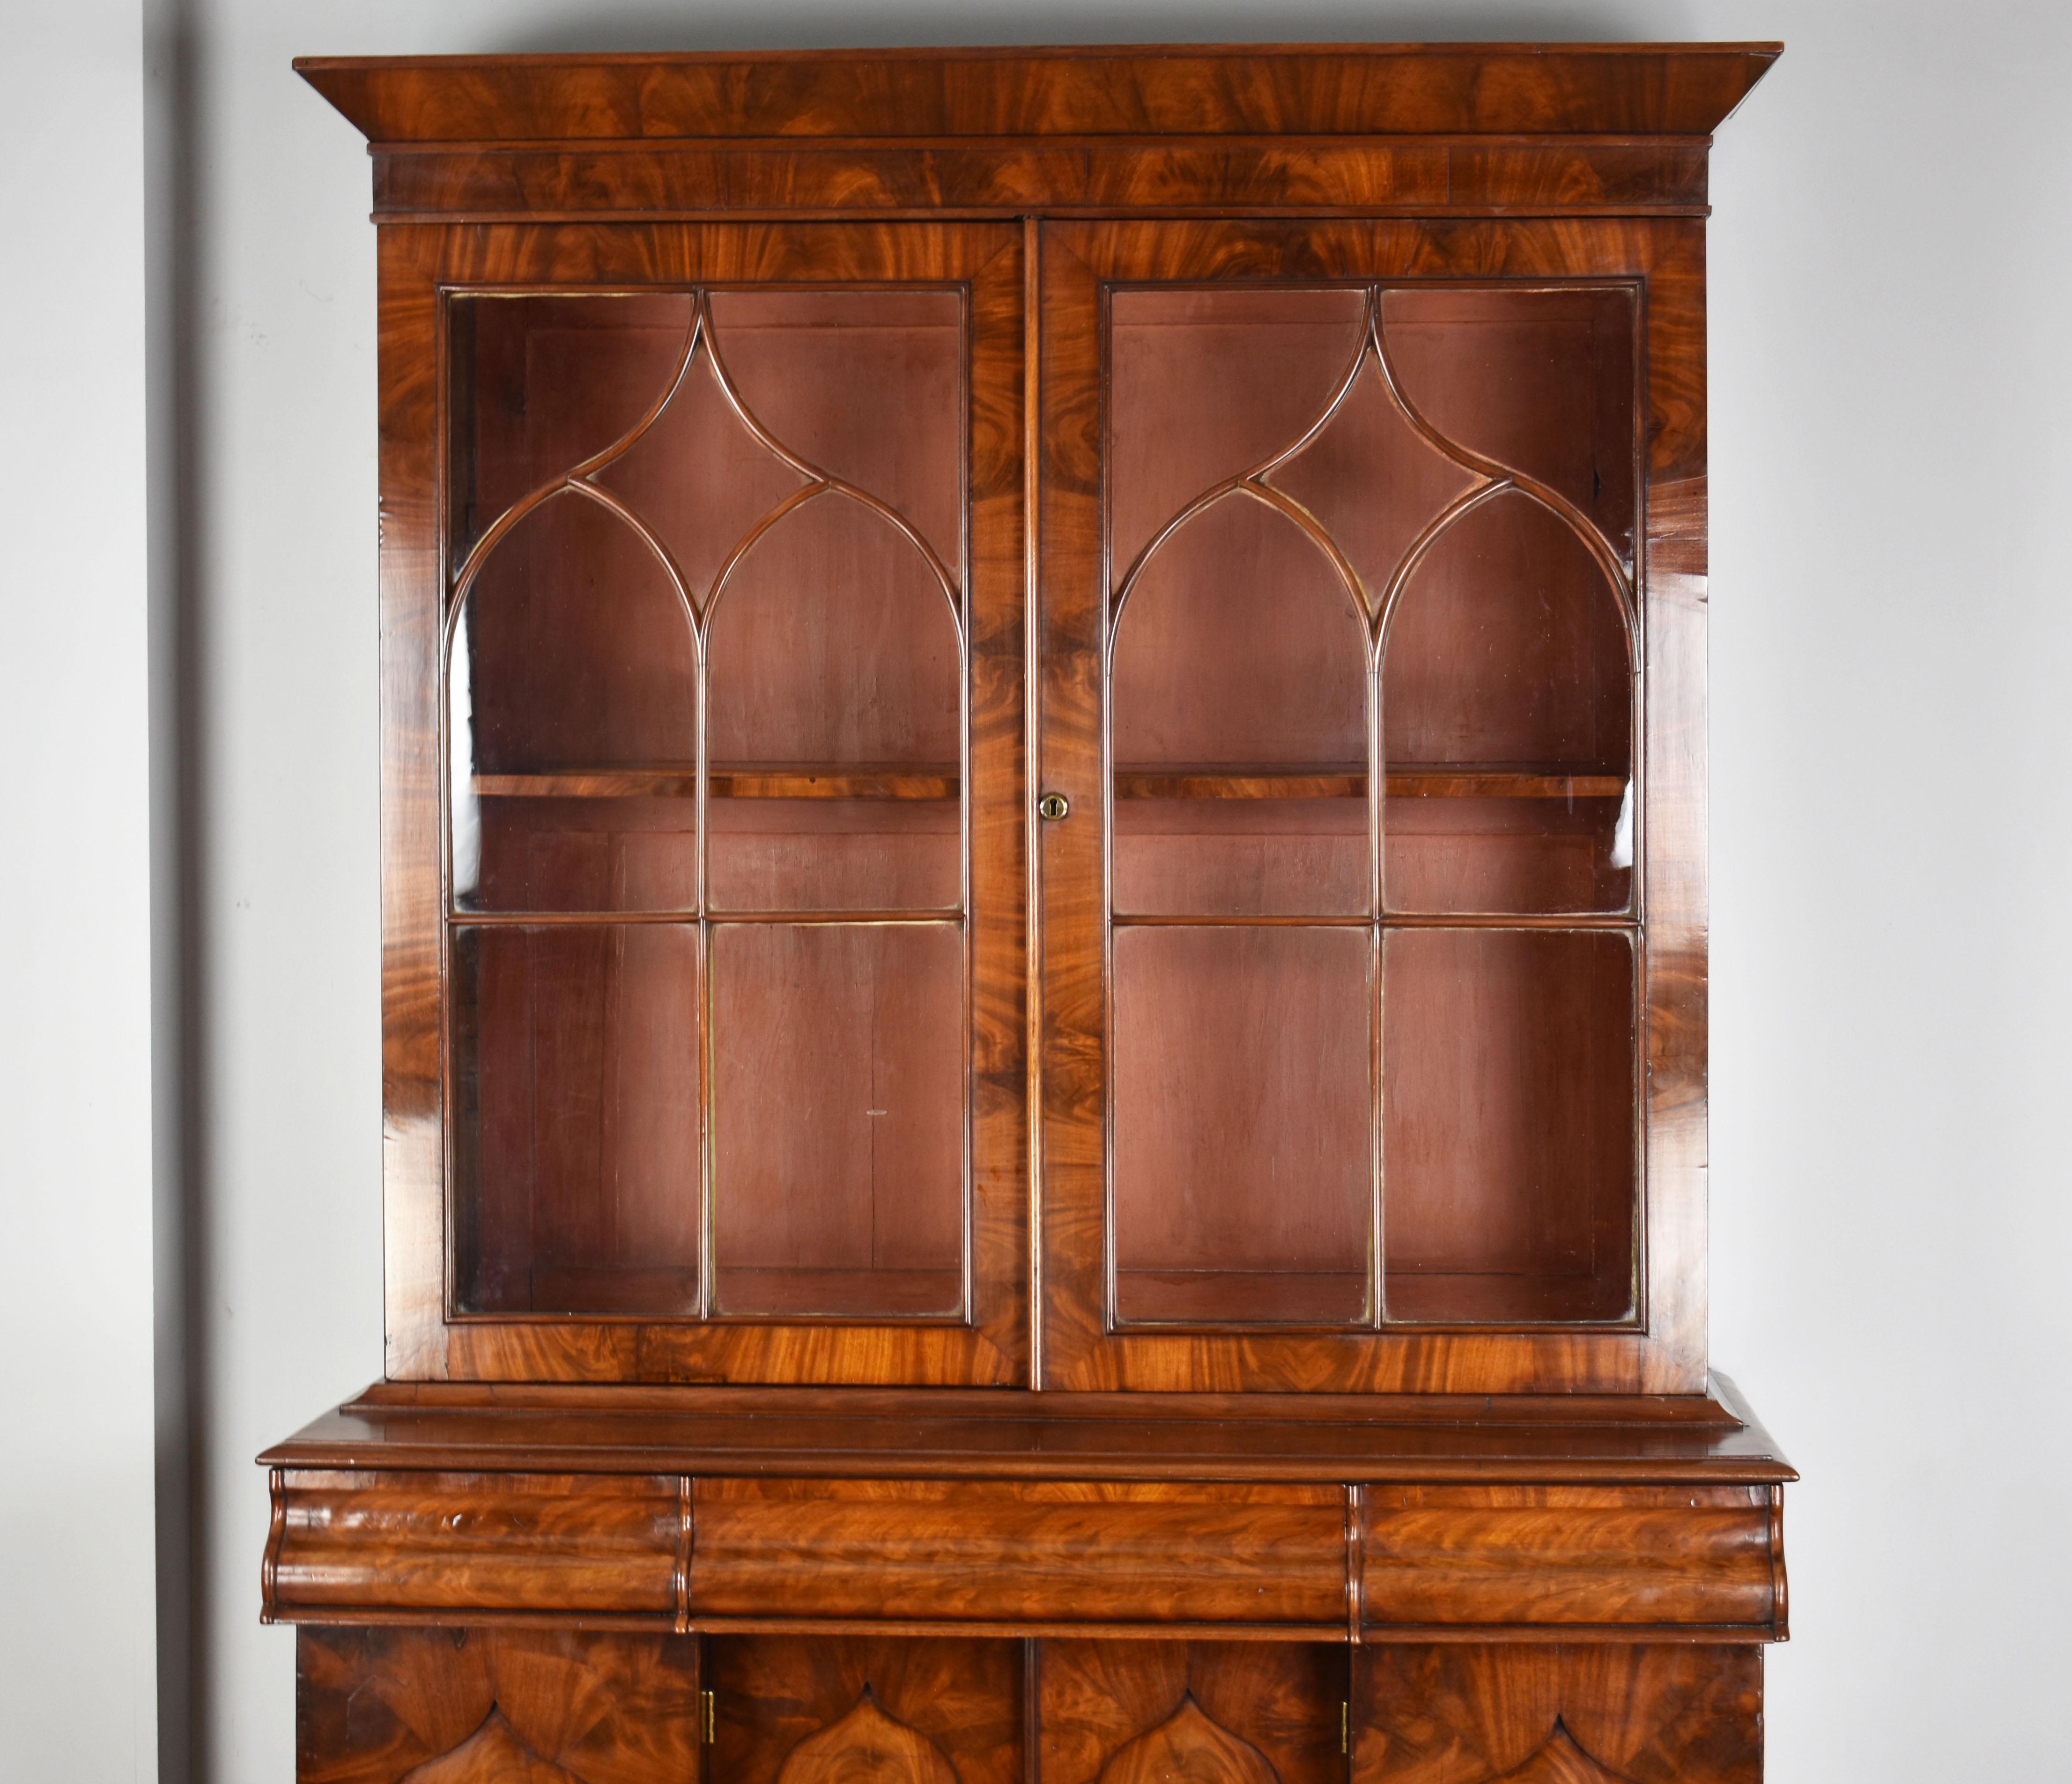 For sale is a superb early Victorian flame mahogany bookcase. The top having two nicely glazed doors opening to two adjustable shelves, above three drawers with a cupboard base below. The bookcase is raised on a plinth base and remains in very good